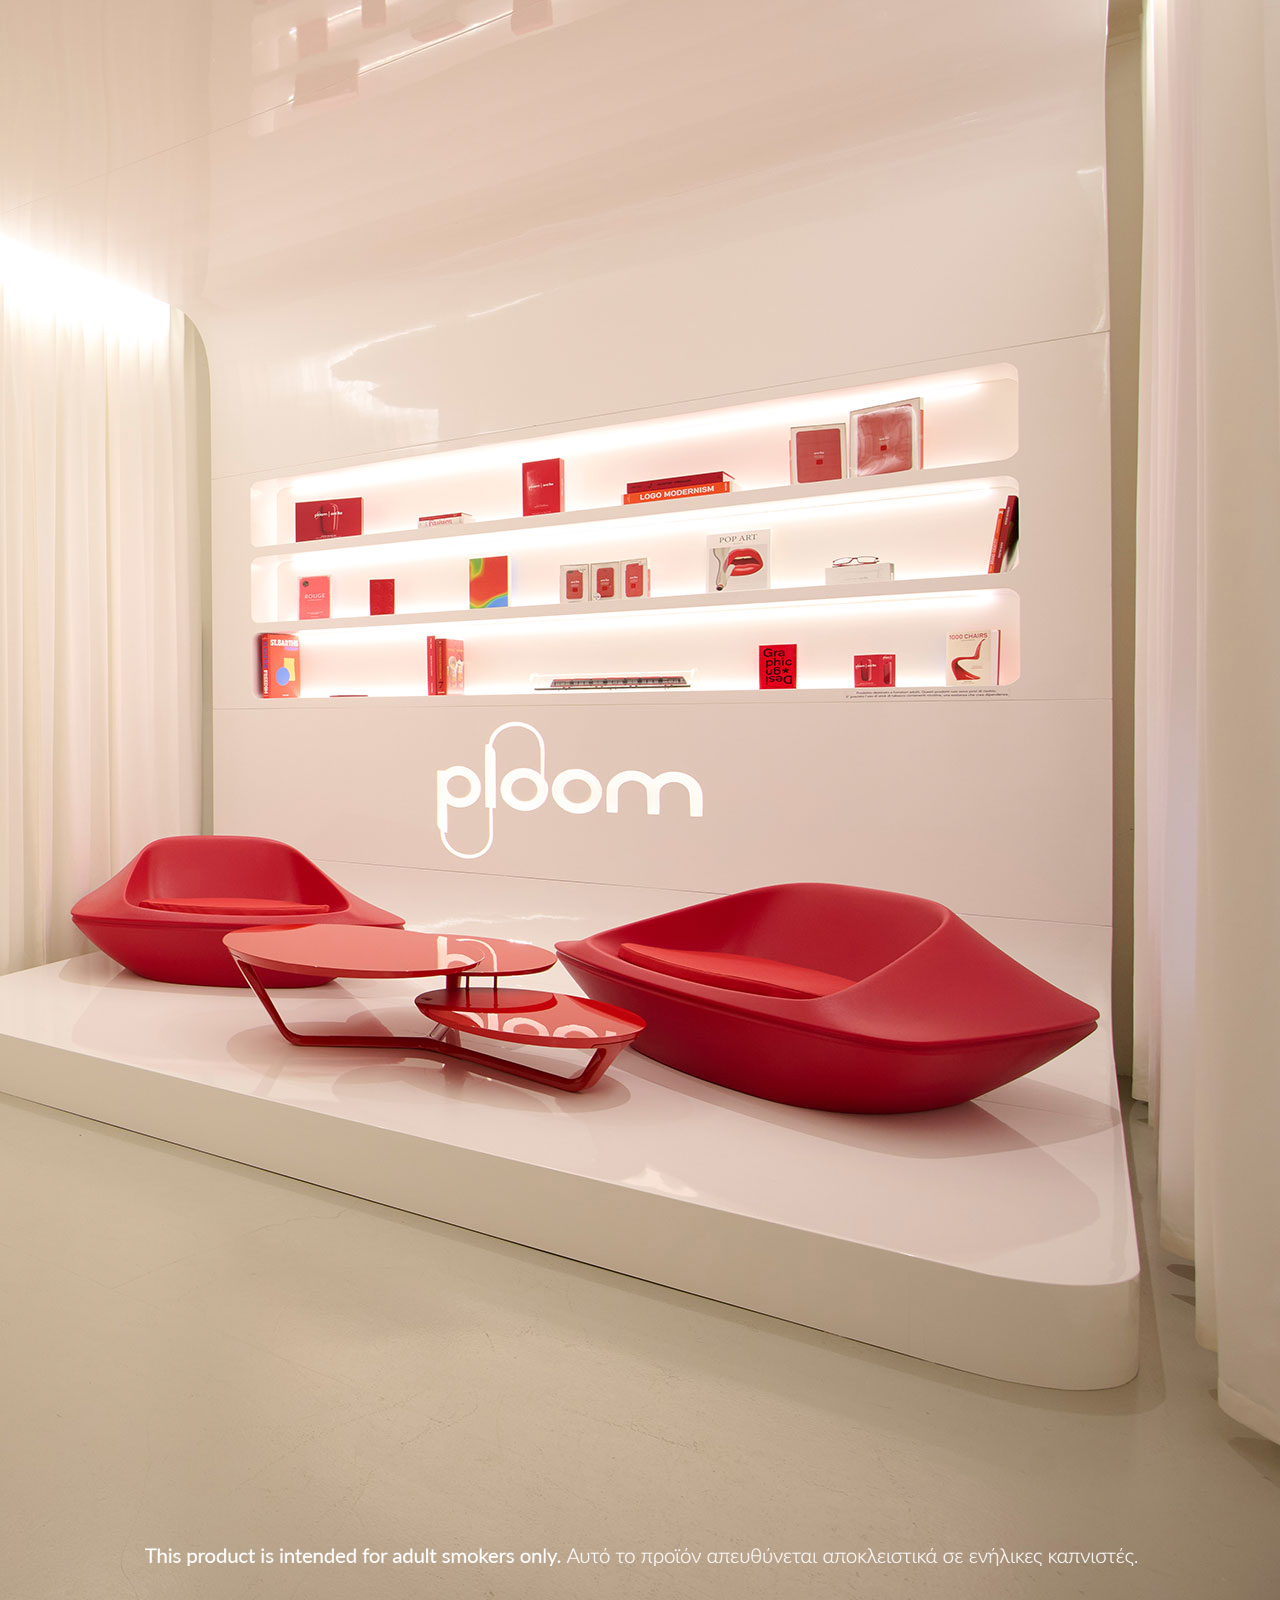 Red Experience By Ploom X Ora Ïto, April 17-21, 2024 at Via Tortona 32, Milan.
This product is intended for adult smokers only.
© Ploom.